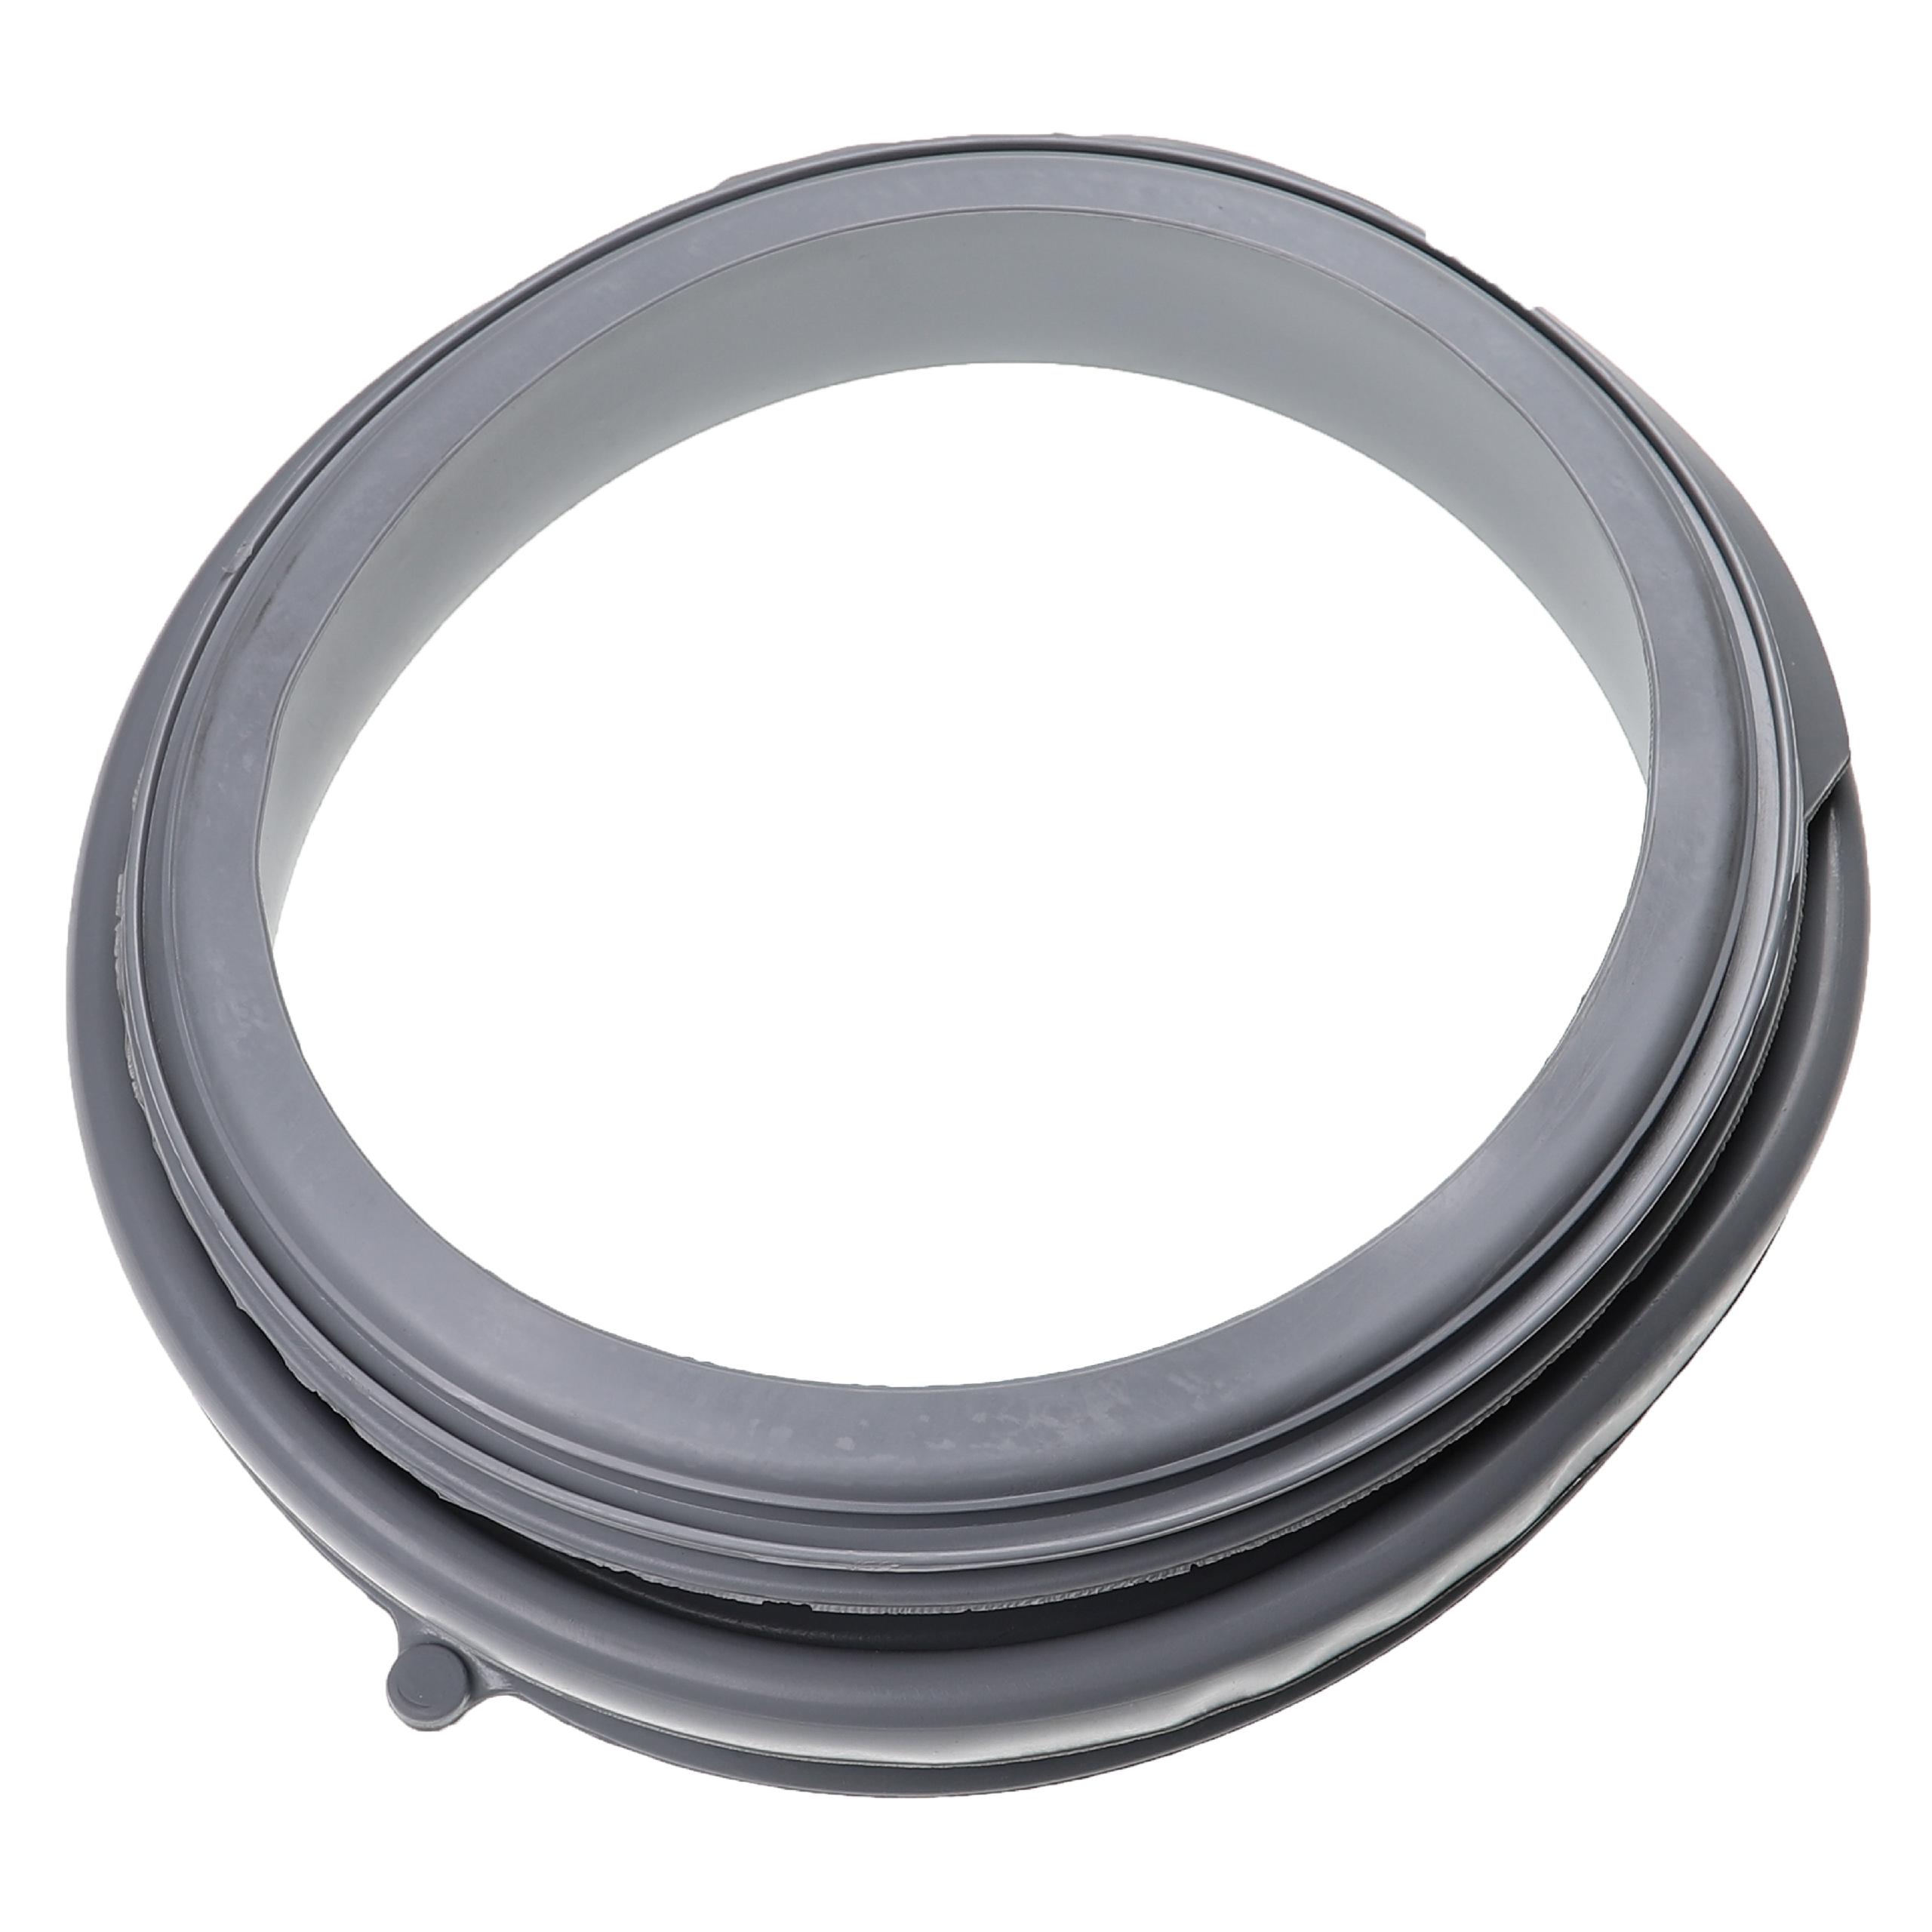 Door Seal replaces 1436571 for Miele Washing Machine